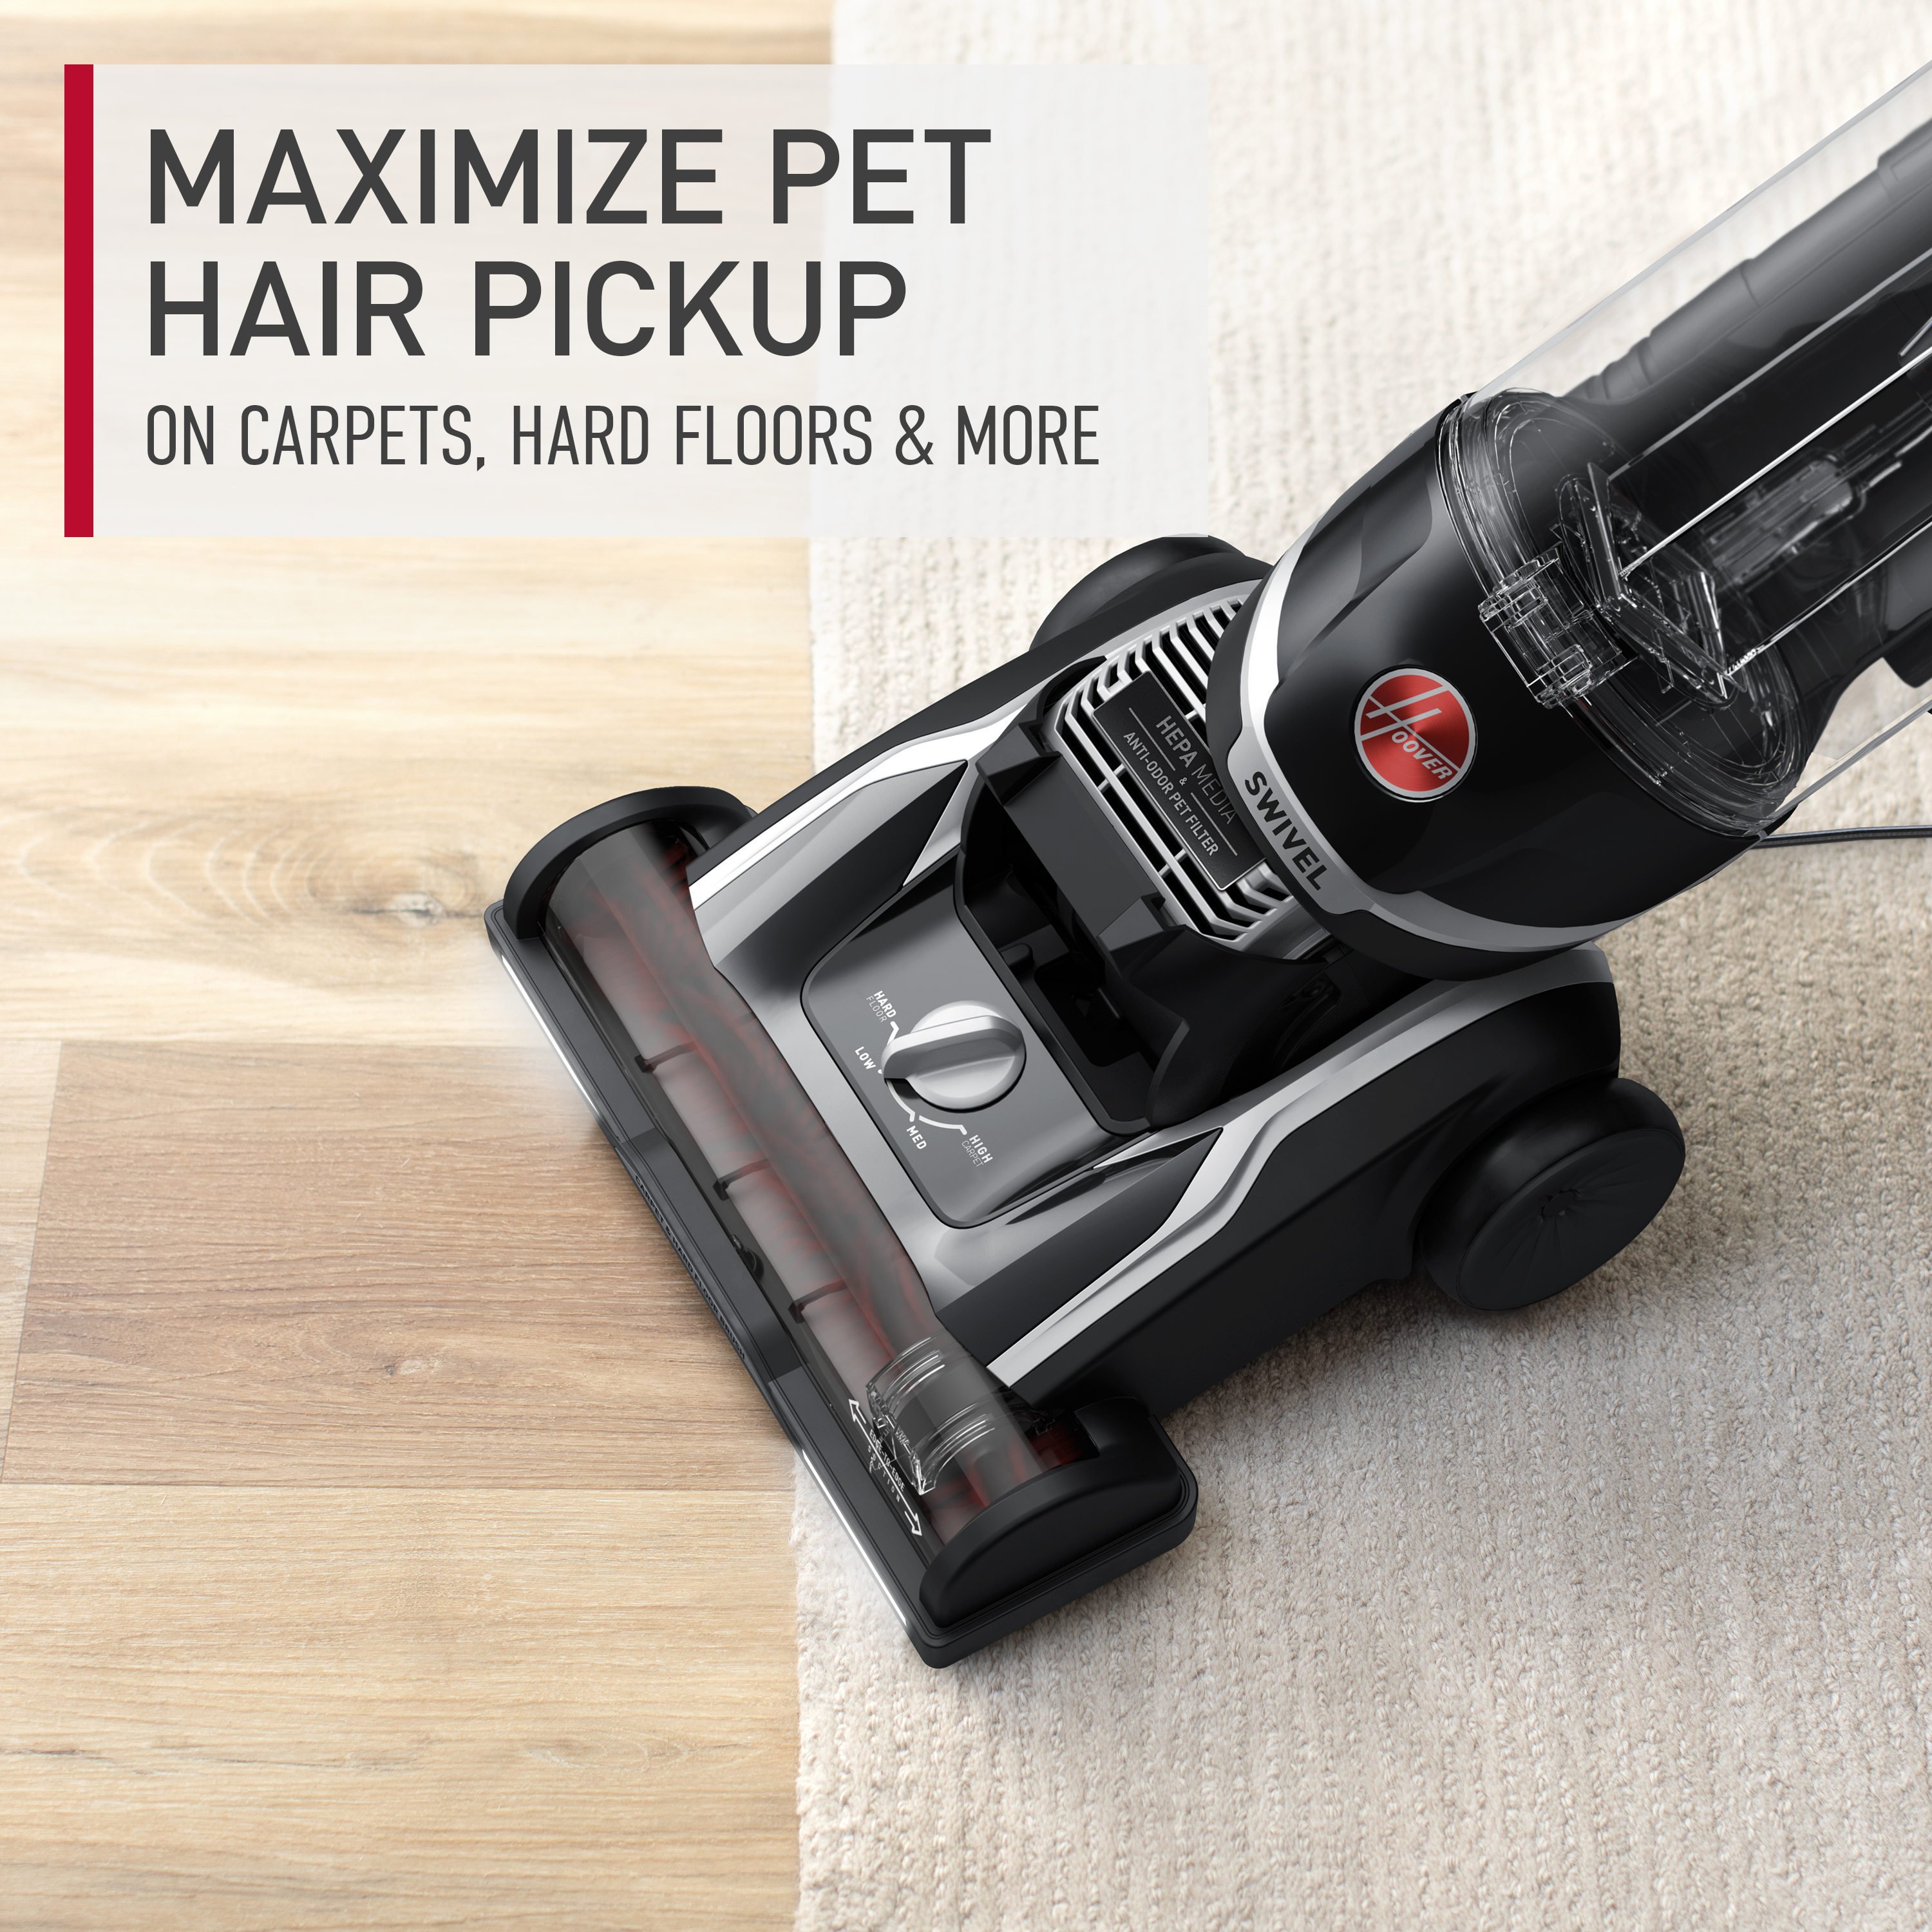 Hoover MAXLife Power Drive Swivel XL Pet Bagless Upright Vacuum Cleaner with HEPA Media Filtration, UH75210, New - image 5 of 9